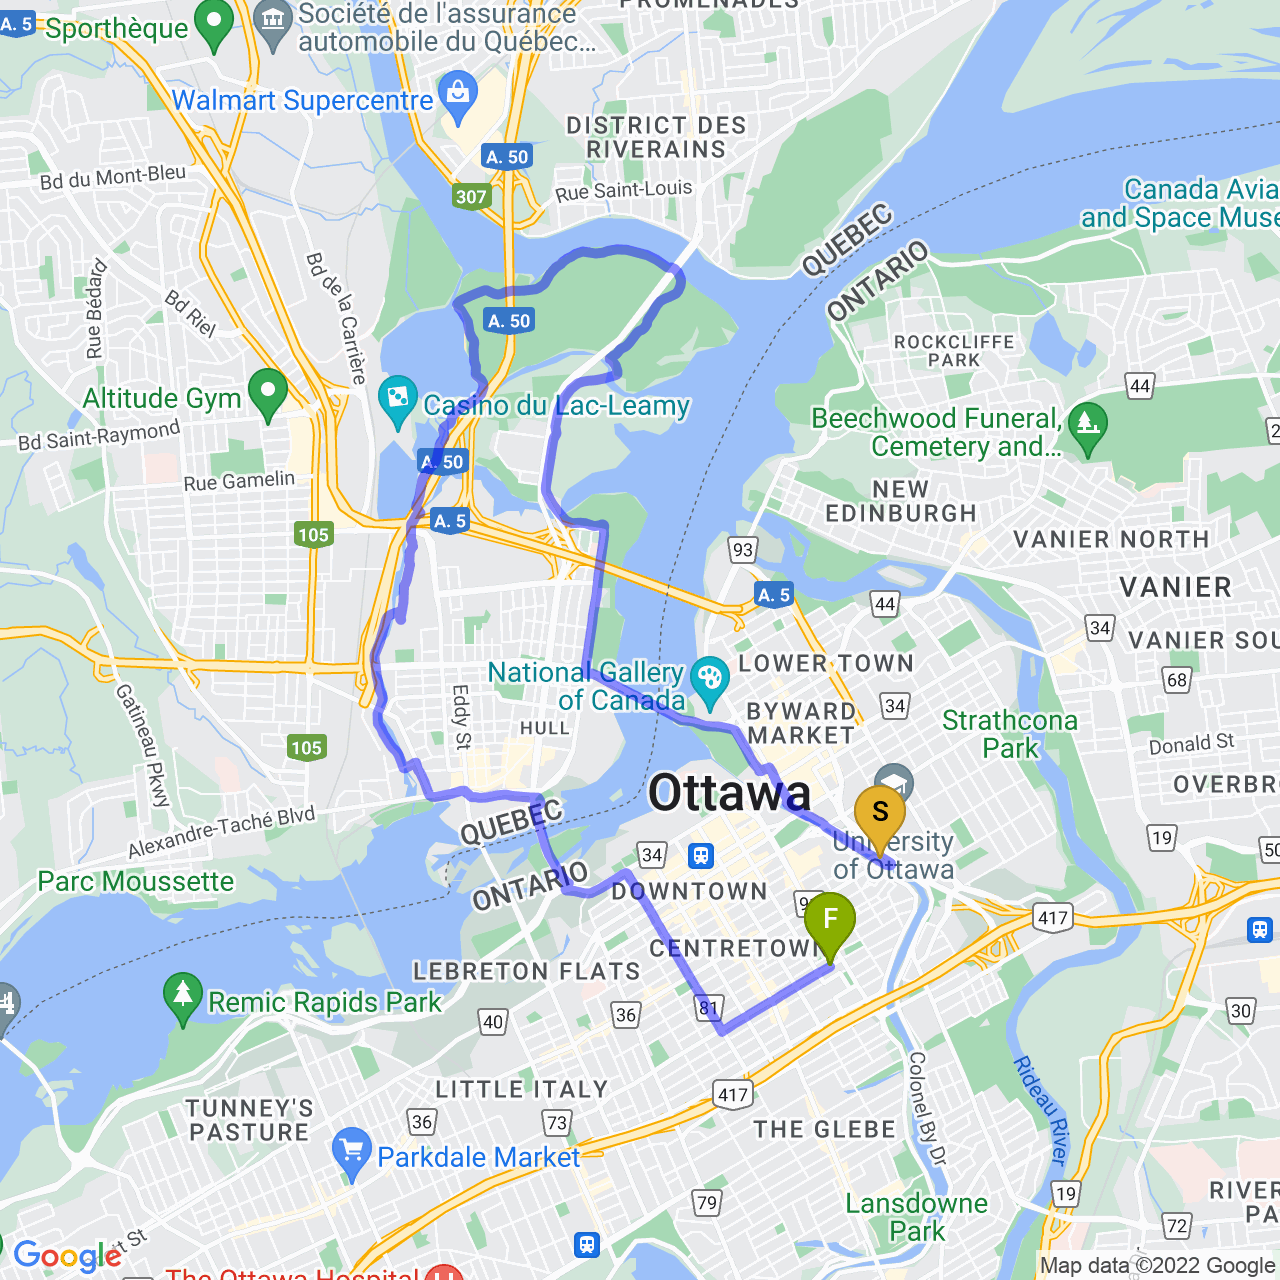 map of chill ride